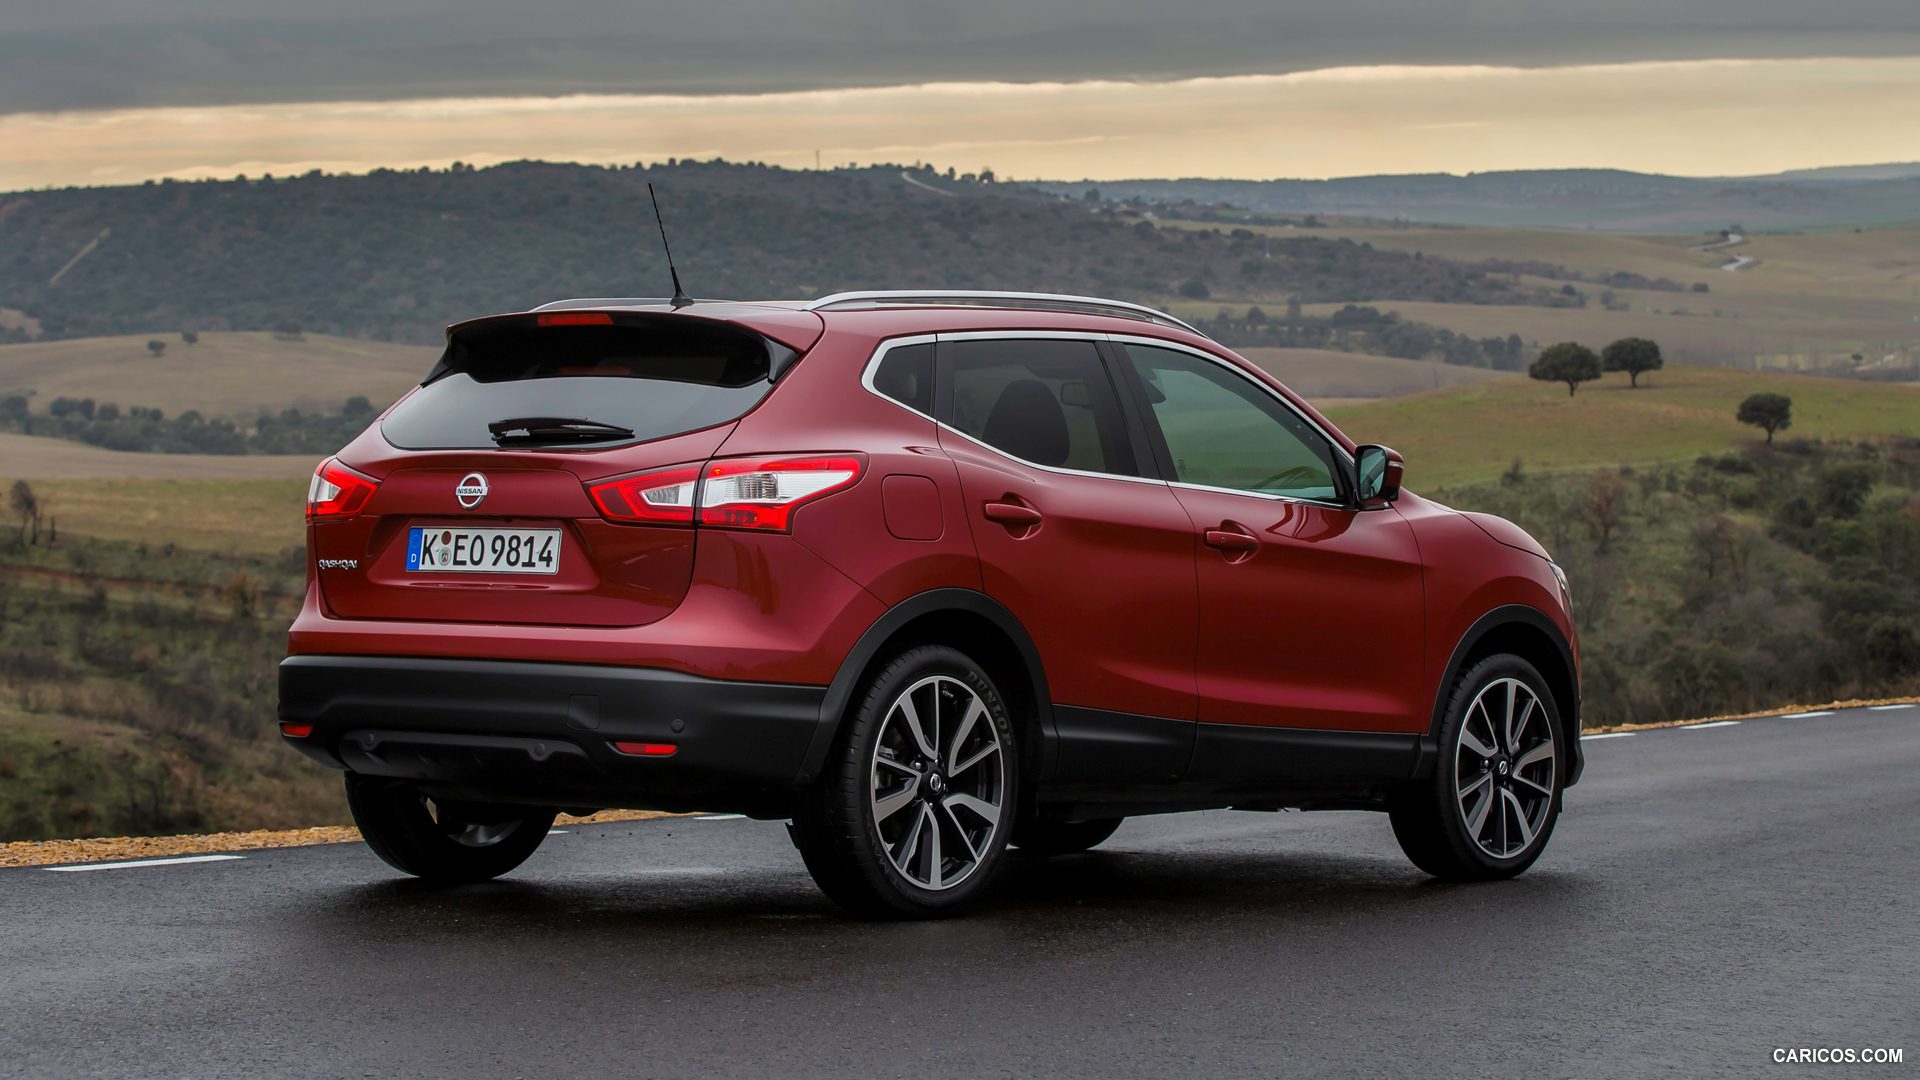 Amazing 2014 Nissan Qashqai Pictures & Backgrounds